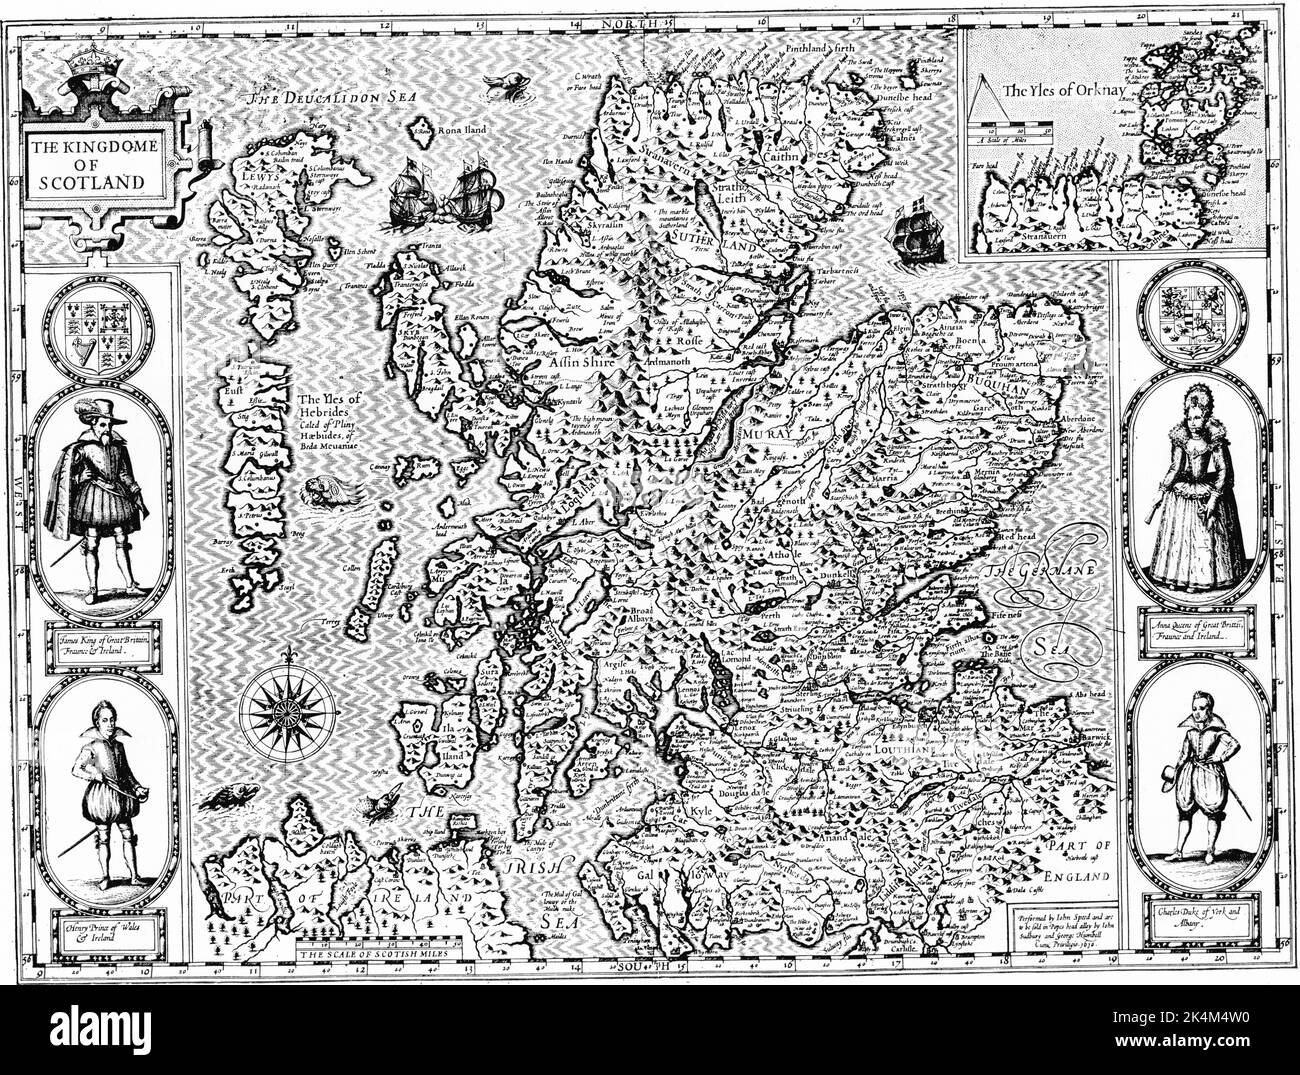 Scotland, 1611. By John Speed (1551 or 1552-1629). From the 'Theatre of the Empire of Great Britaine', 1611. The 'Theatre of the Empire of Great Britaine' was the first English attempt at creating a large scale atlas. Stock Photo